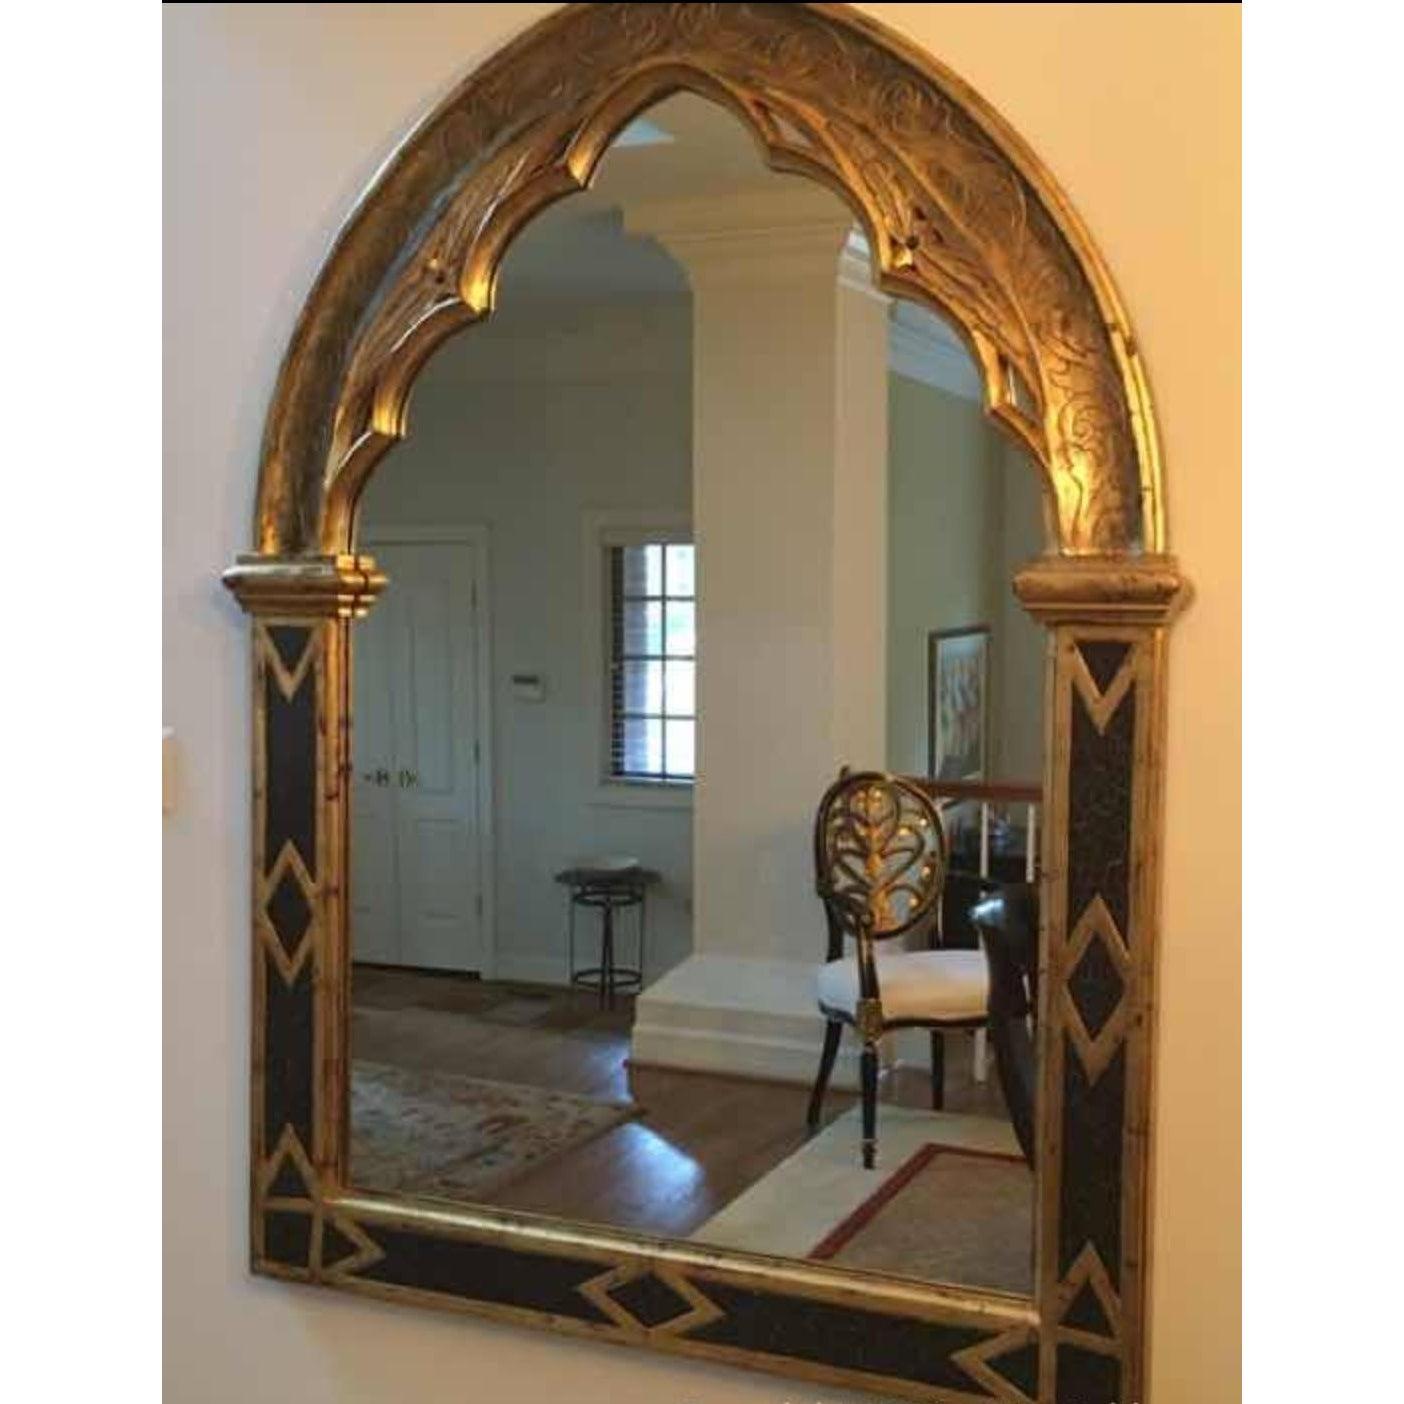 Harrison & Gil wooden mirror with gold and black frame. Marked with the Dauphine Harrison & Gil label. Circa 1980s. Made in Louisiana USA
Model No. G- 5180022.